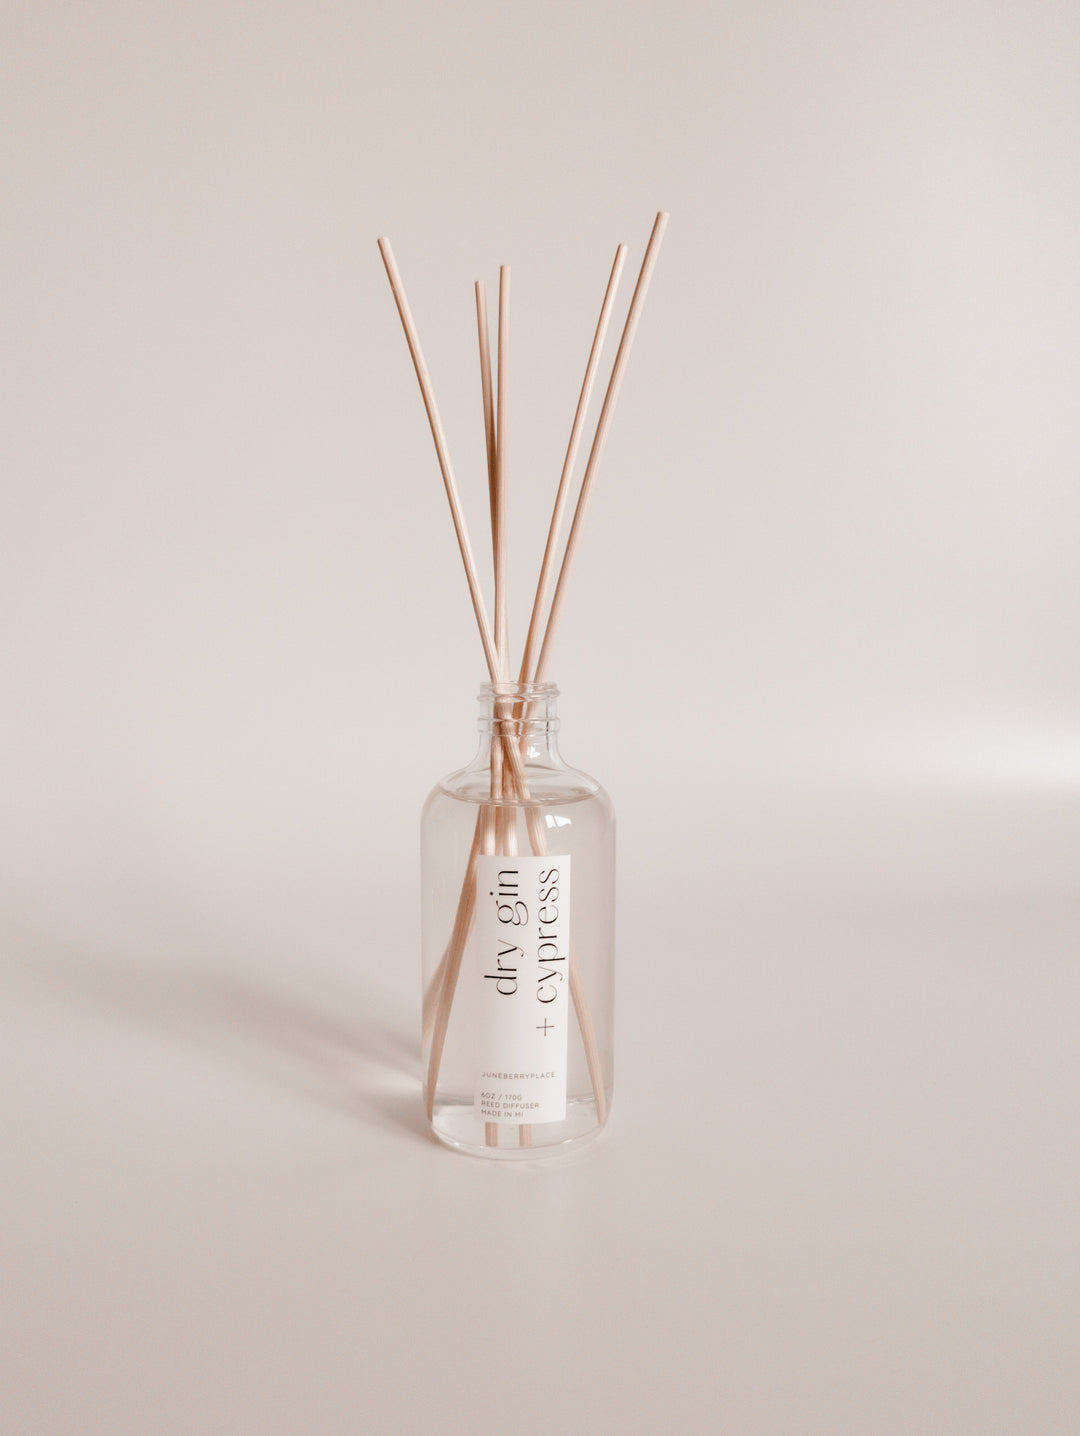 Dry Gin and Cypress Reed Diffuser in clear glass bottle with reeds by juneberryplace home fragrances